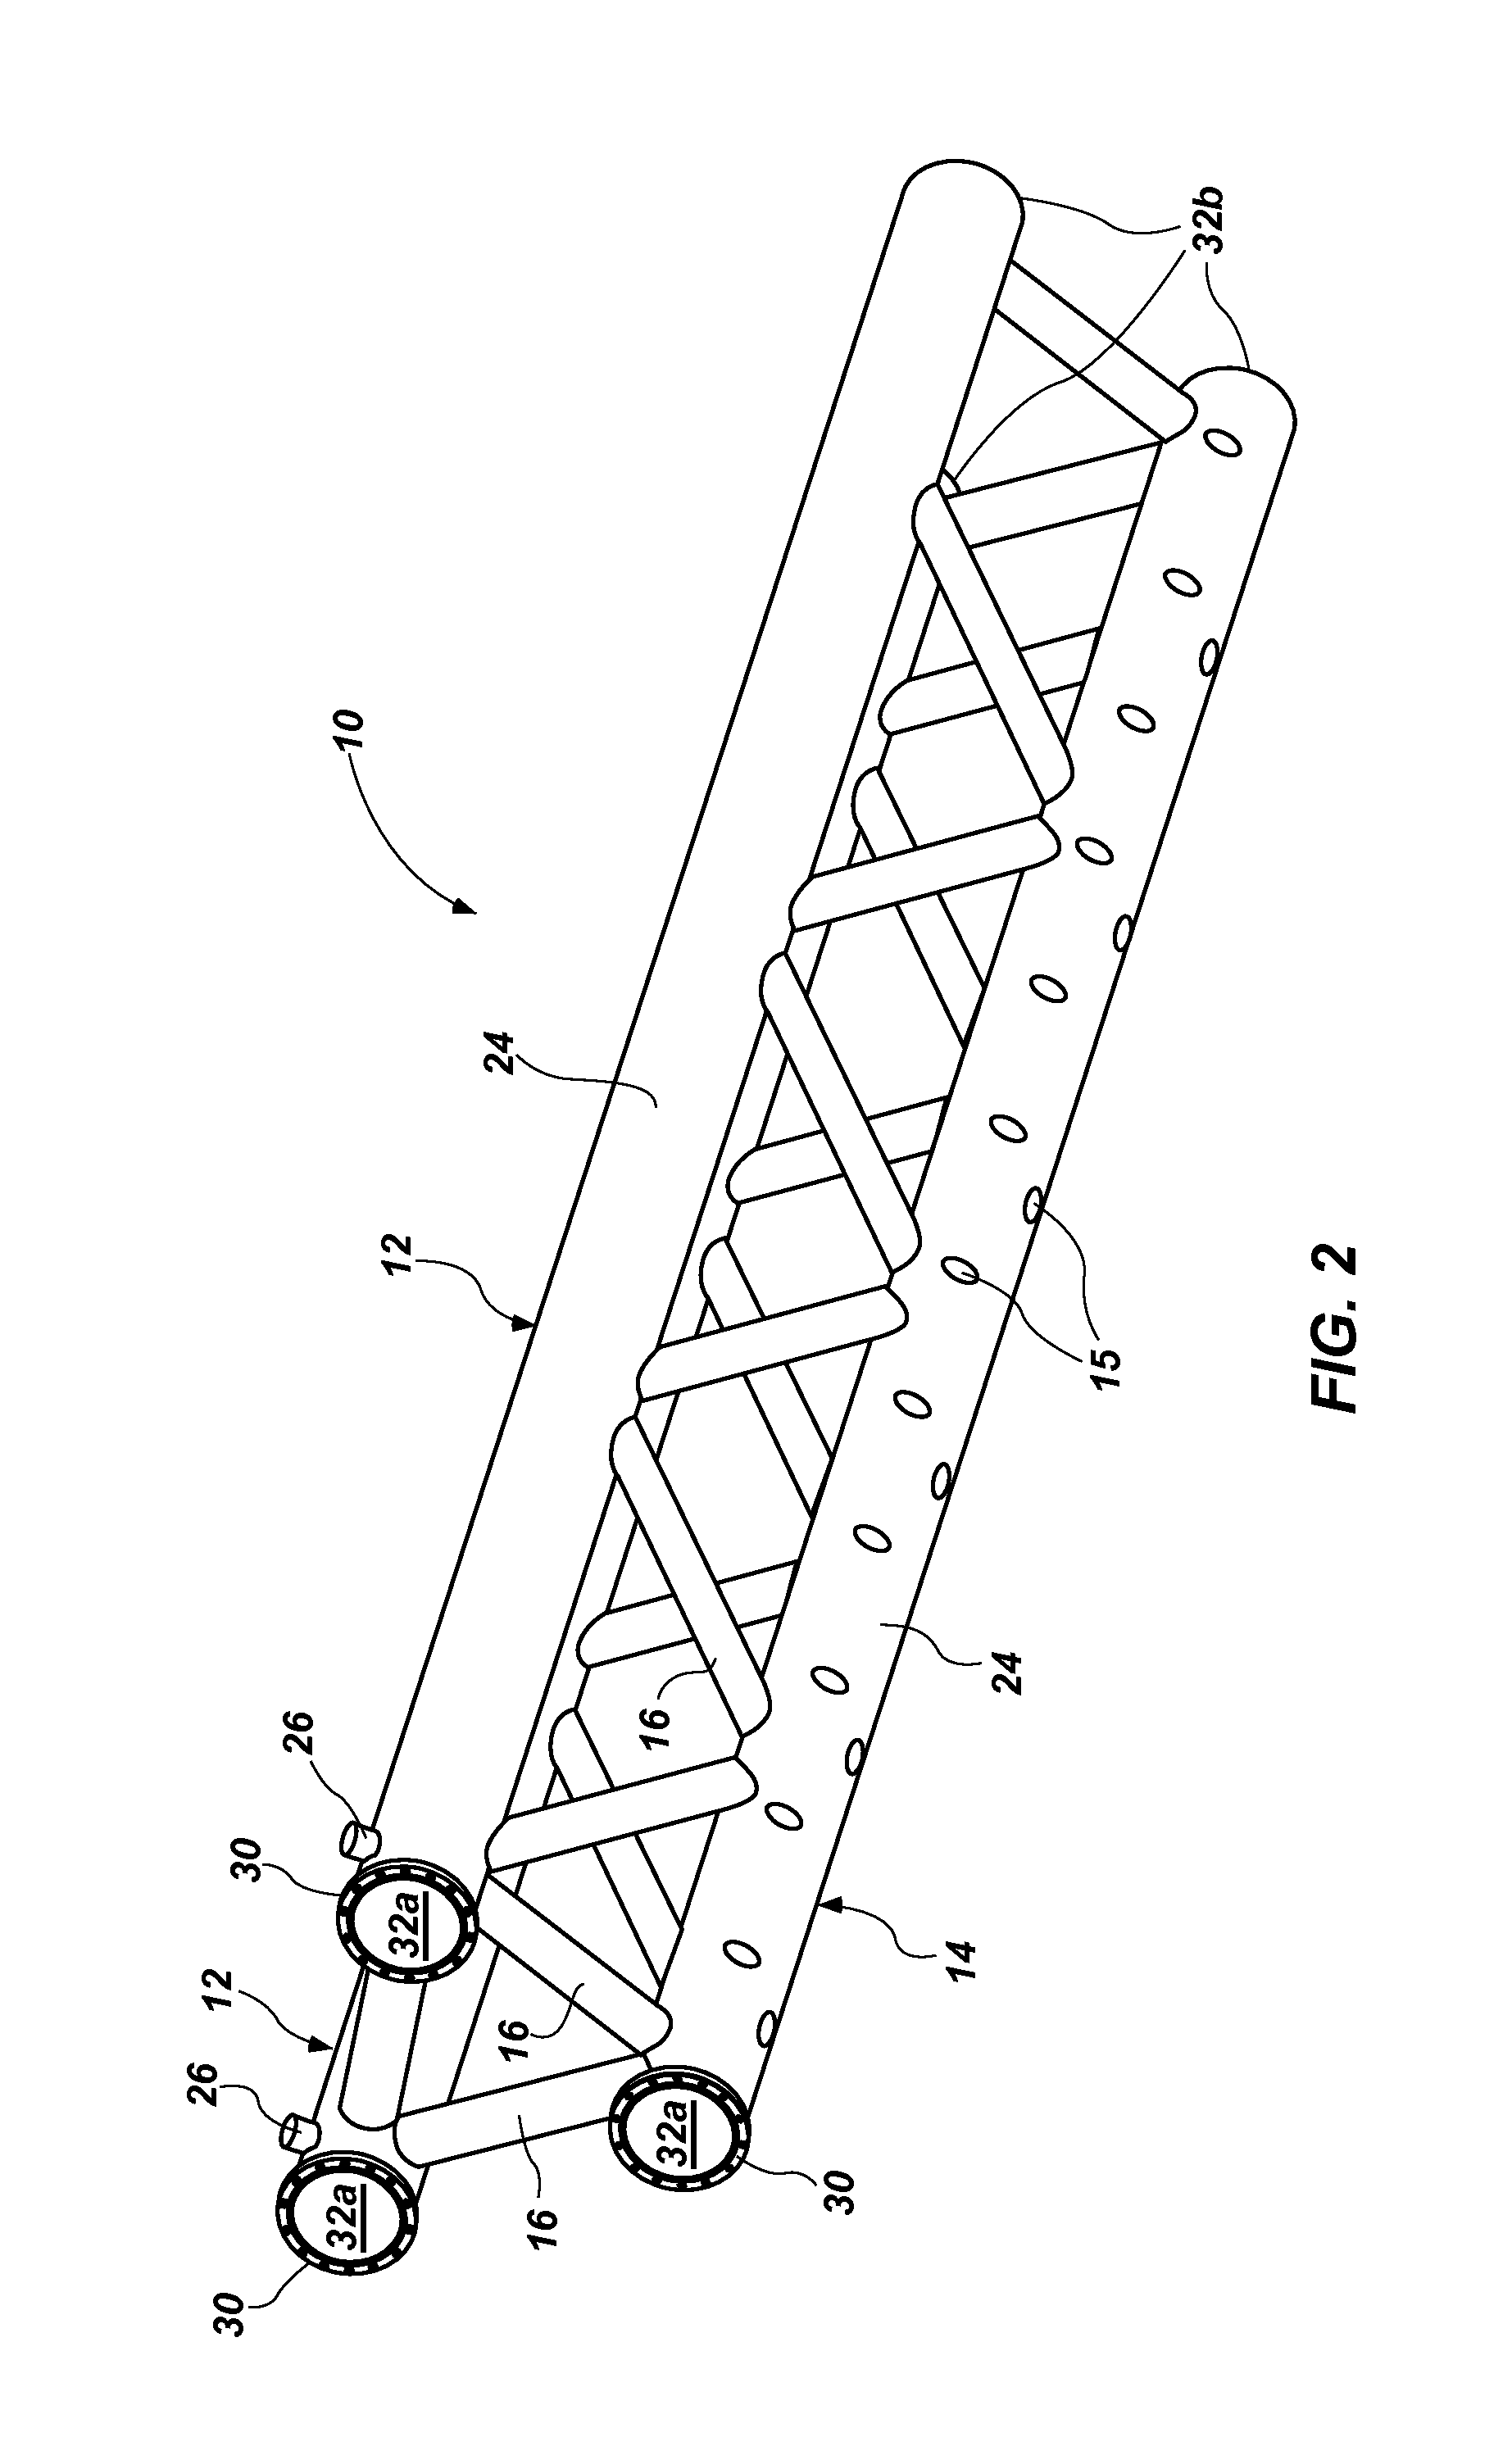 Wave attenuation system and method